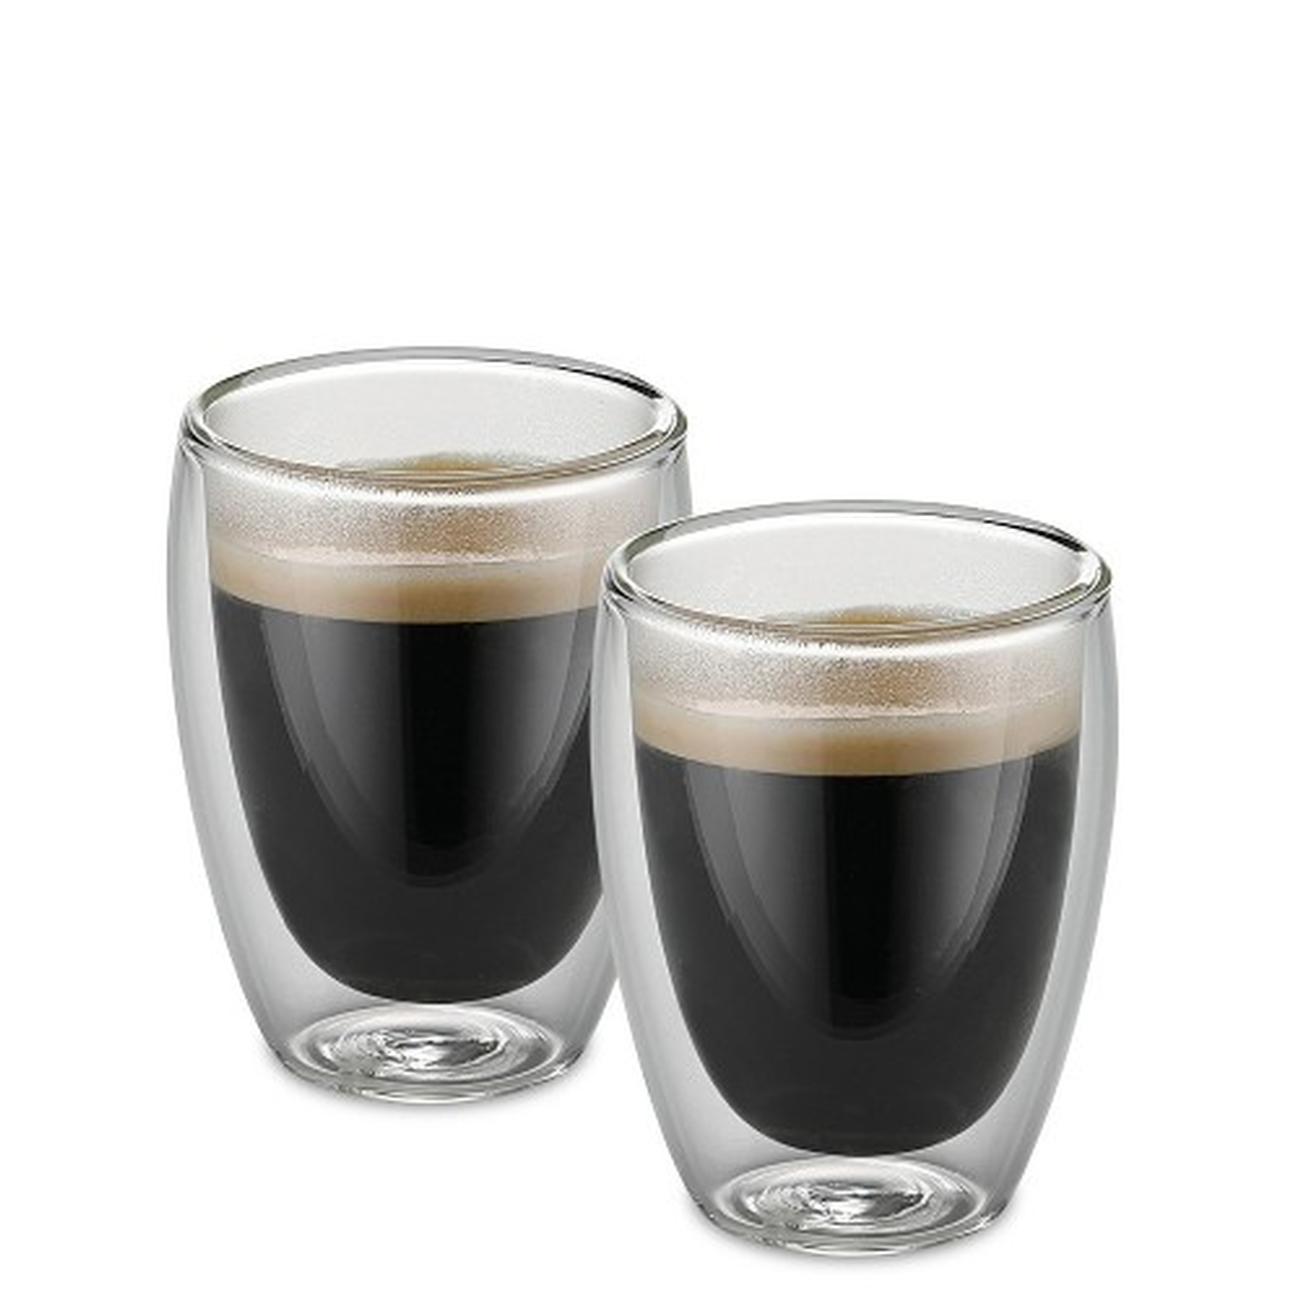 weis-set-of-2-double-walled-glass-cups-80ml - Double-Walled Glasses 2pc Set 80ml